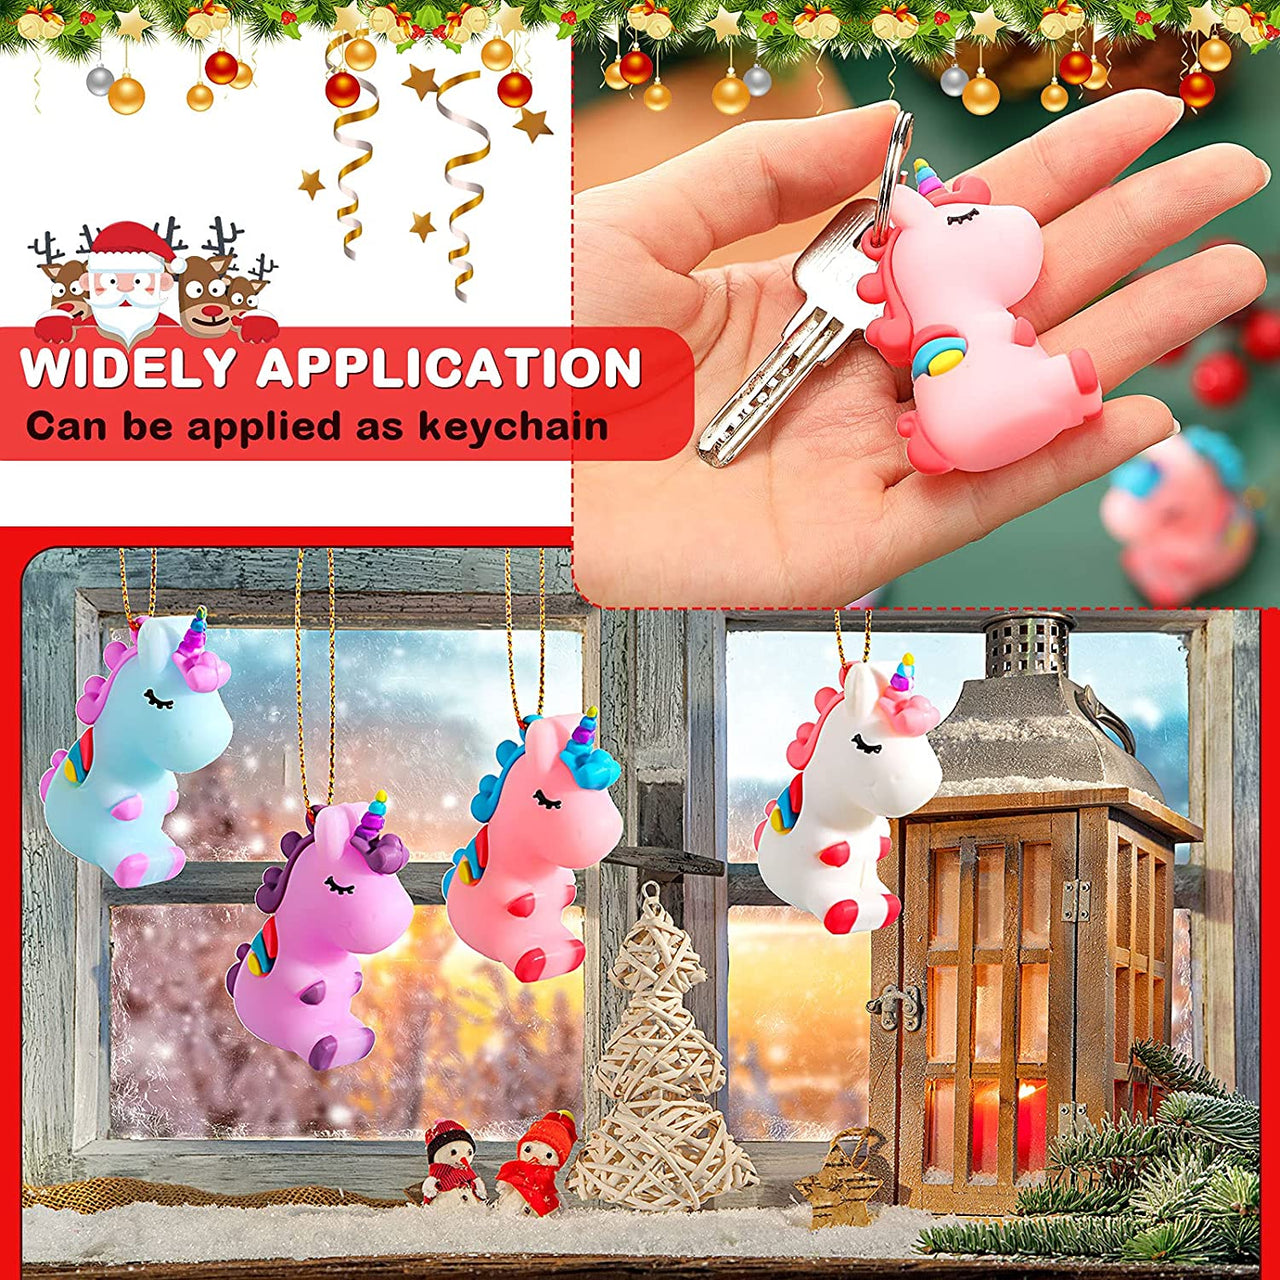 12 Pieces Christmas Unicorn Ornaments Hanging Christmas Tree Ornament Unicorn Ornament Decor for Unicorn Birthday Christmas Party Supplies